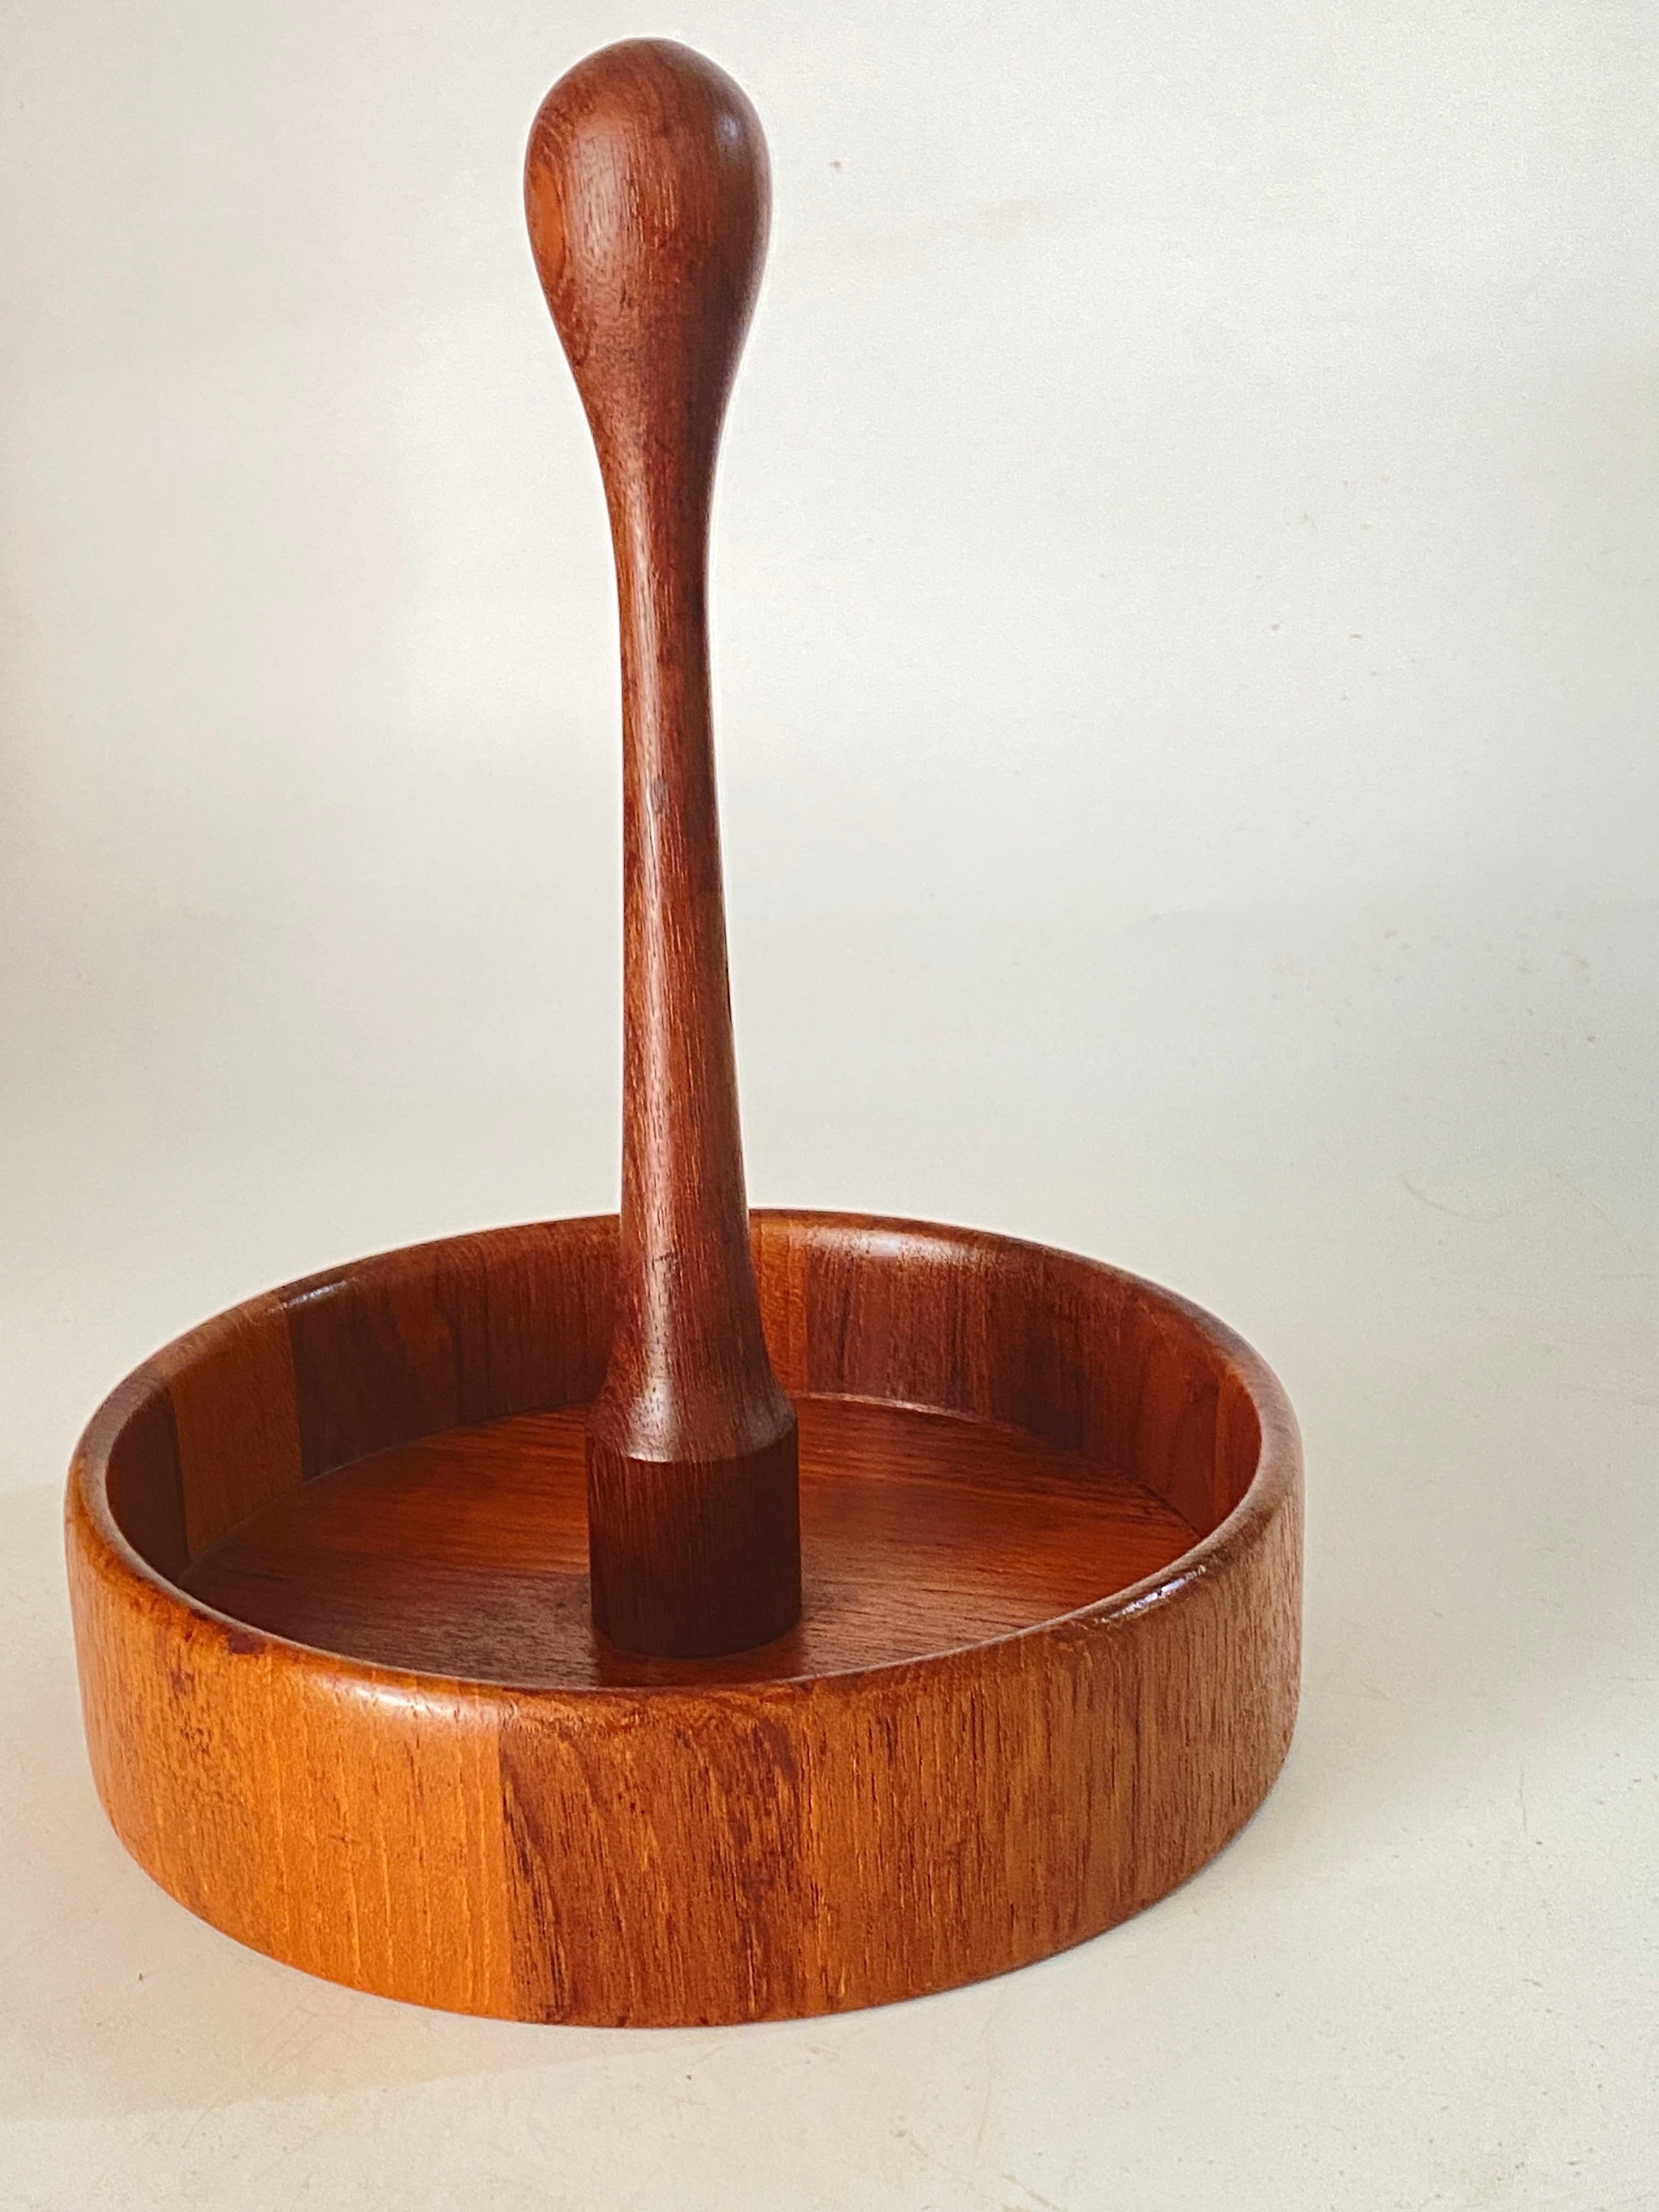 Scandinavian Modern Spice Tray in Wood Denmark 1960s Brown Color with a wooden handle For Sale